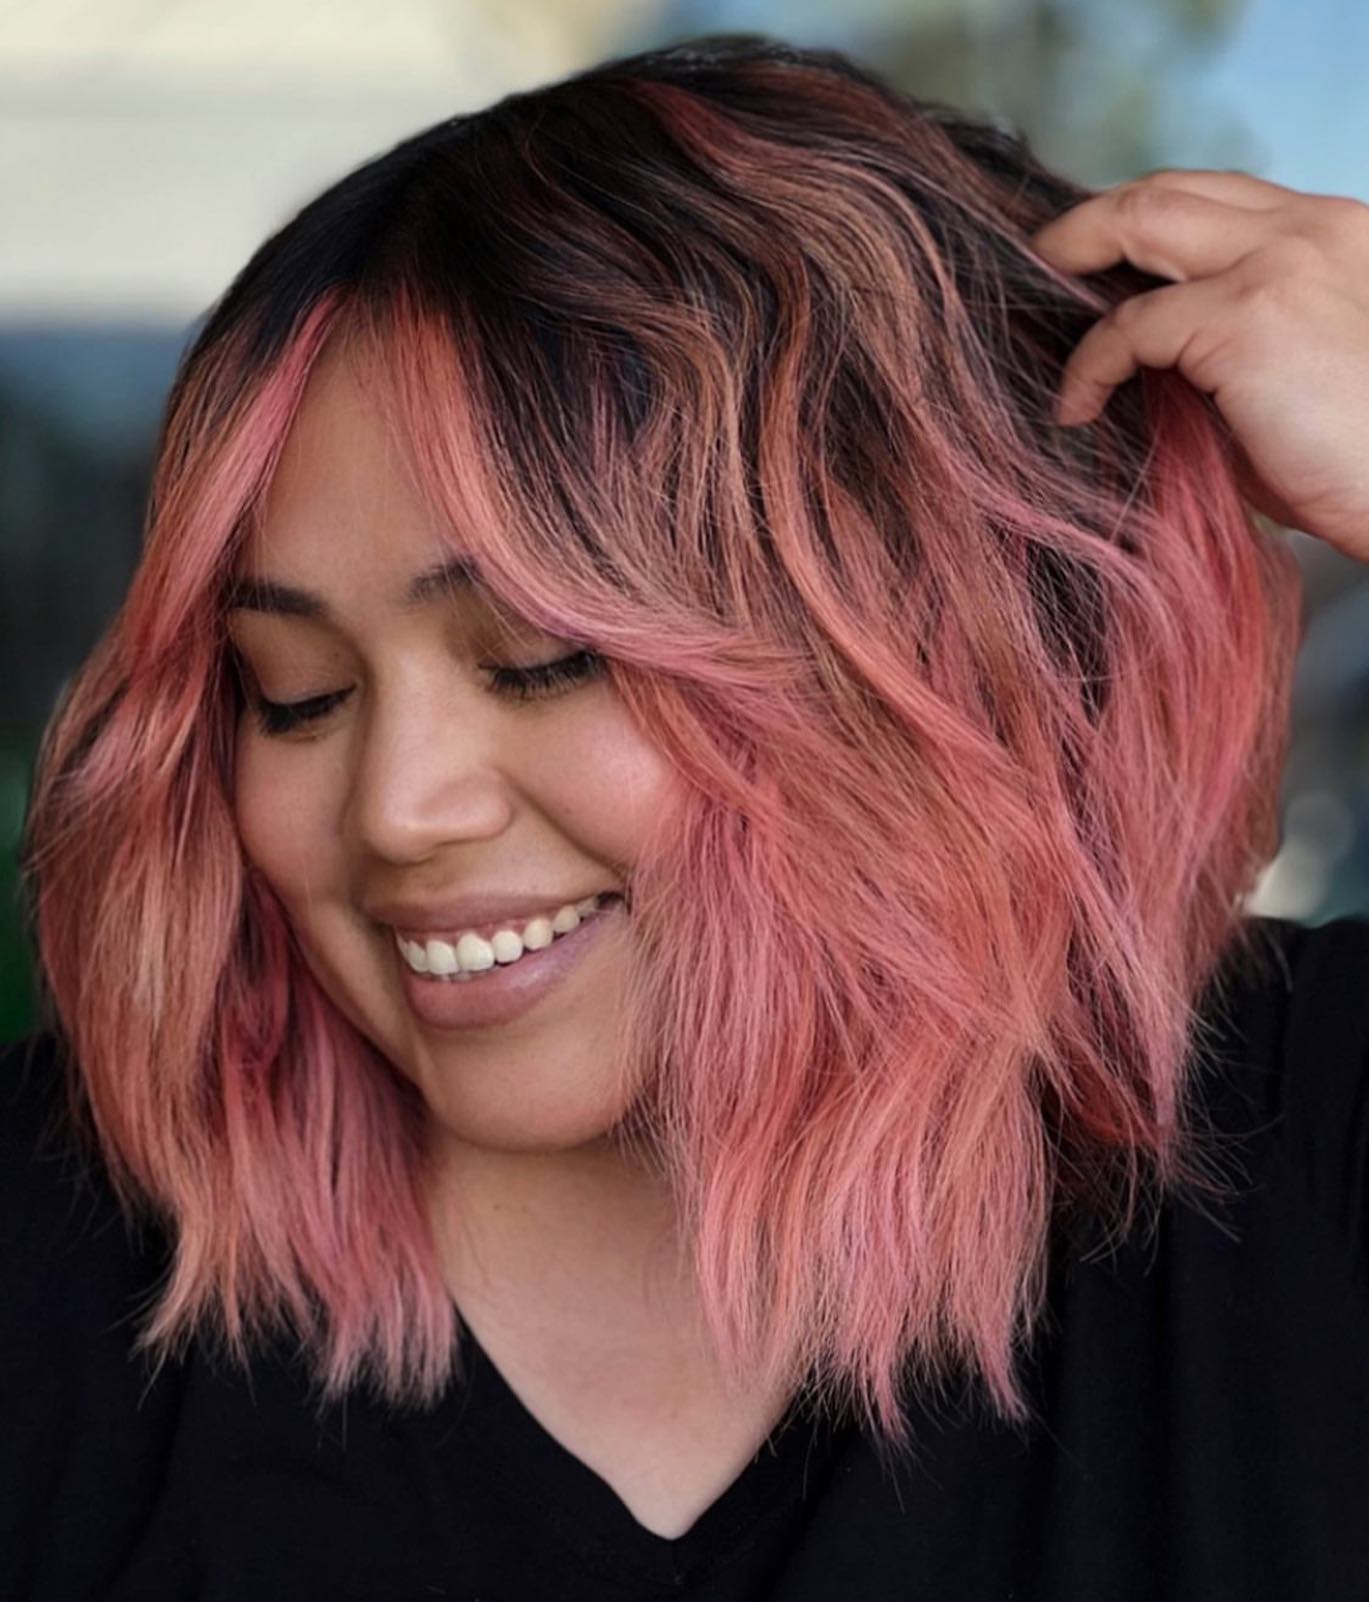 100+ Best Colorful Hair Ideas images 35